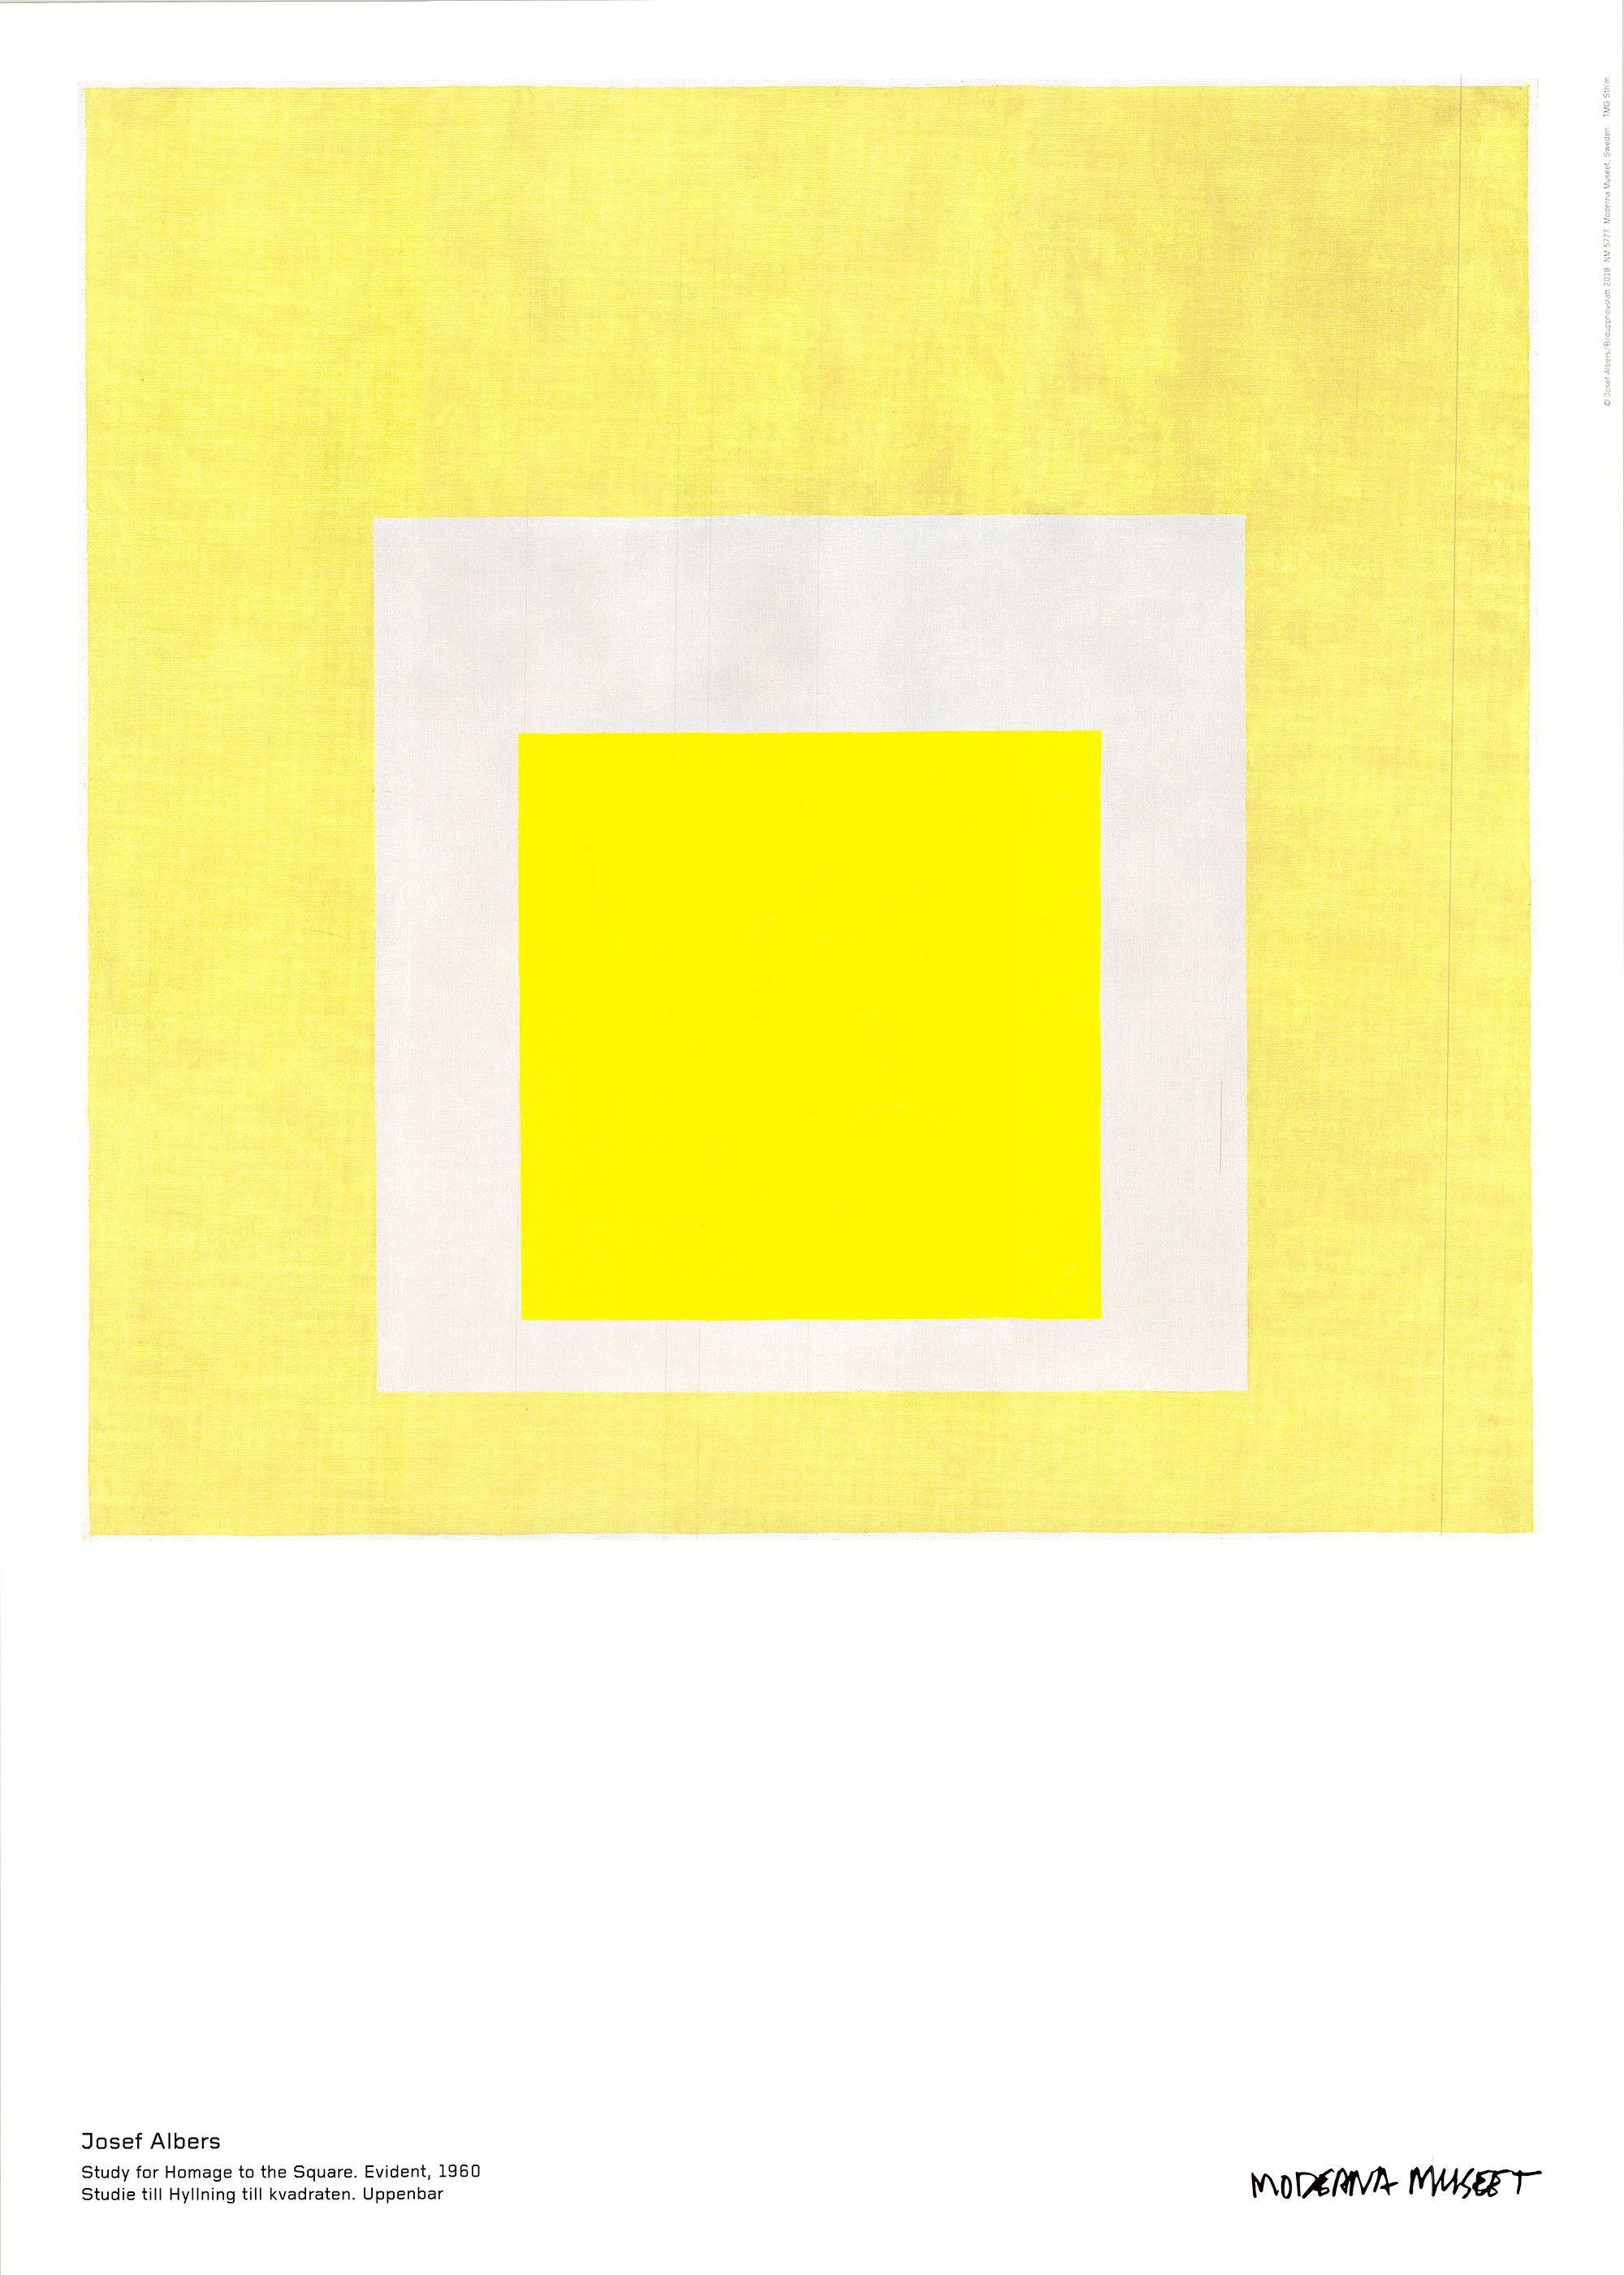 Poster Study for Homage to the Square:Evident Moderna Museet Yellow Gray Minimal - Print by (after) Josef Albers